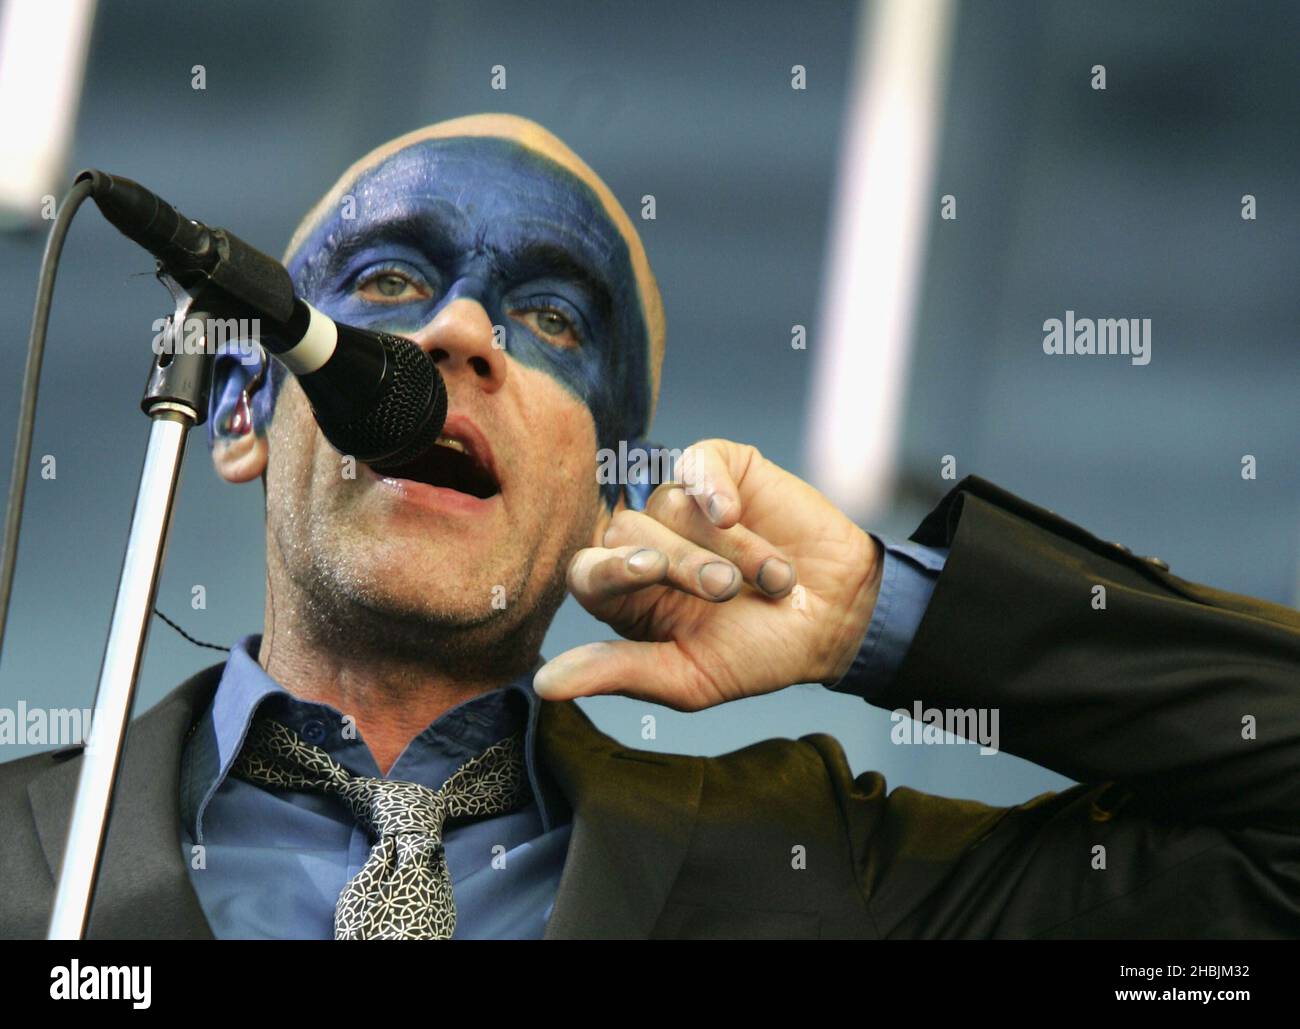 Michael Stipe of British Indie group REM performs on stage at their second London show this year, in Hyde Park on July 16, 2005 in London. Stock Photo